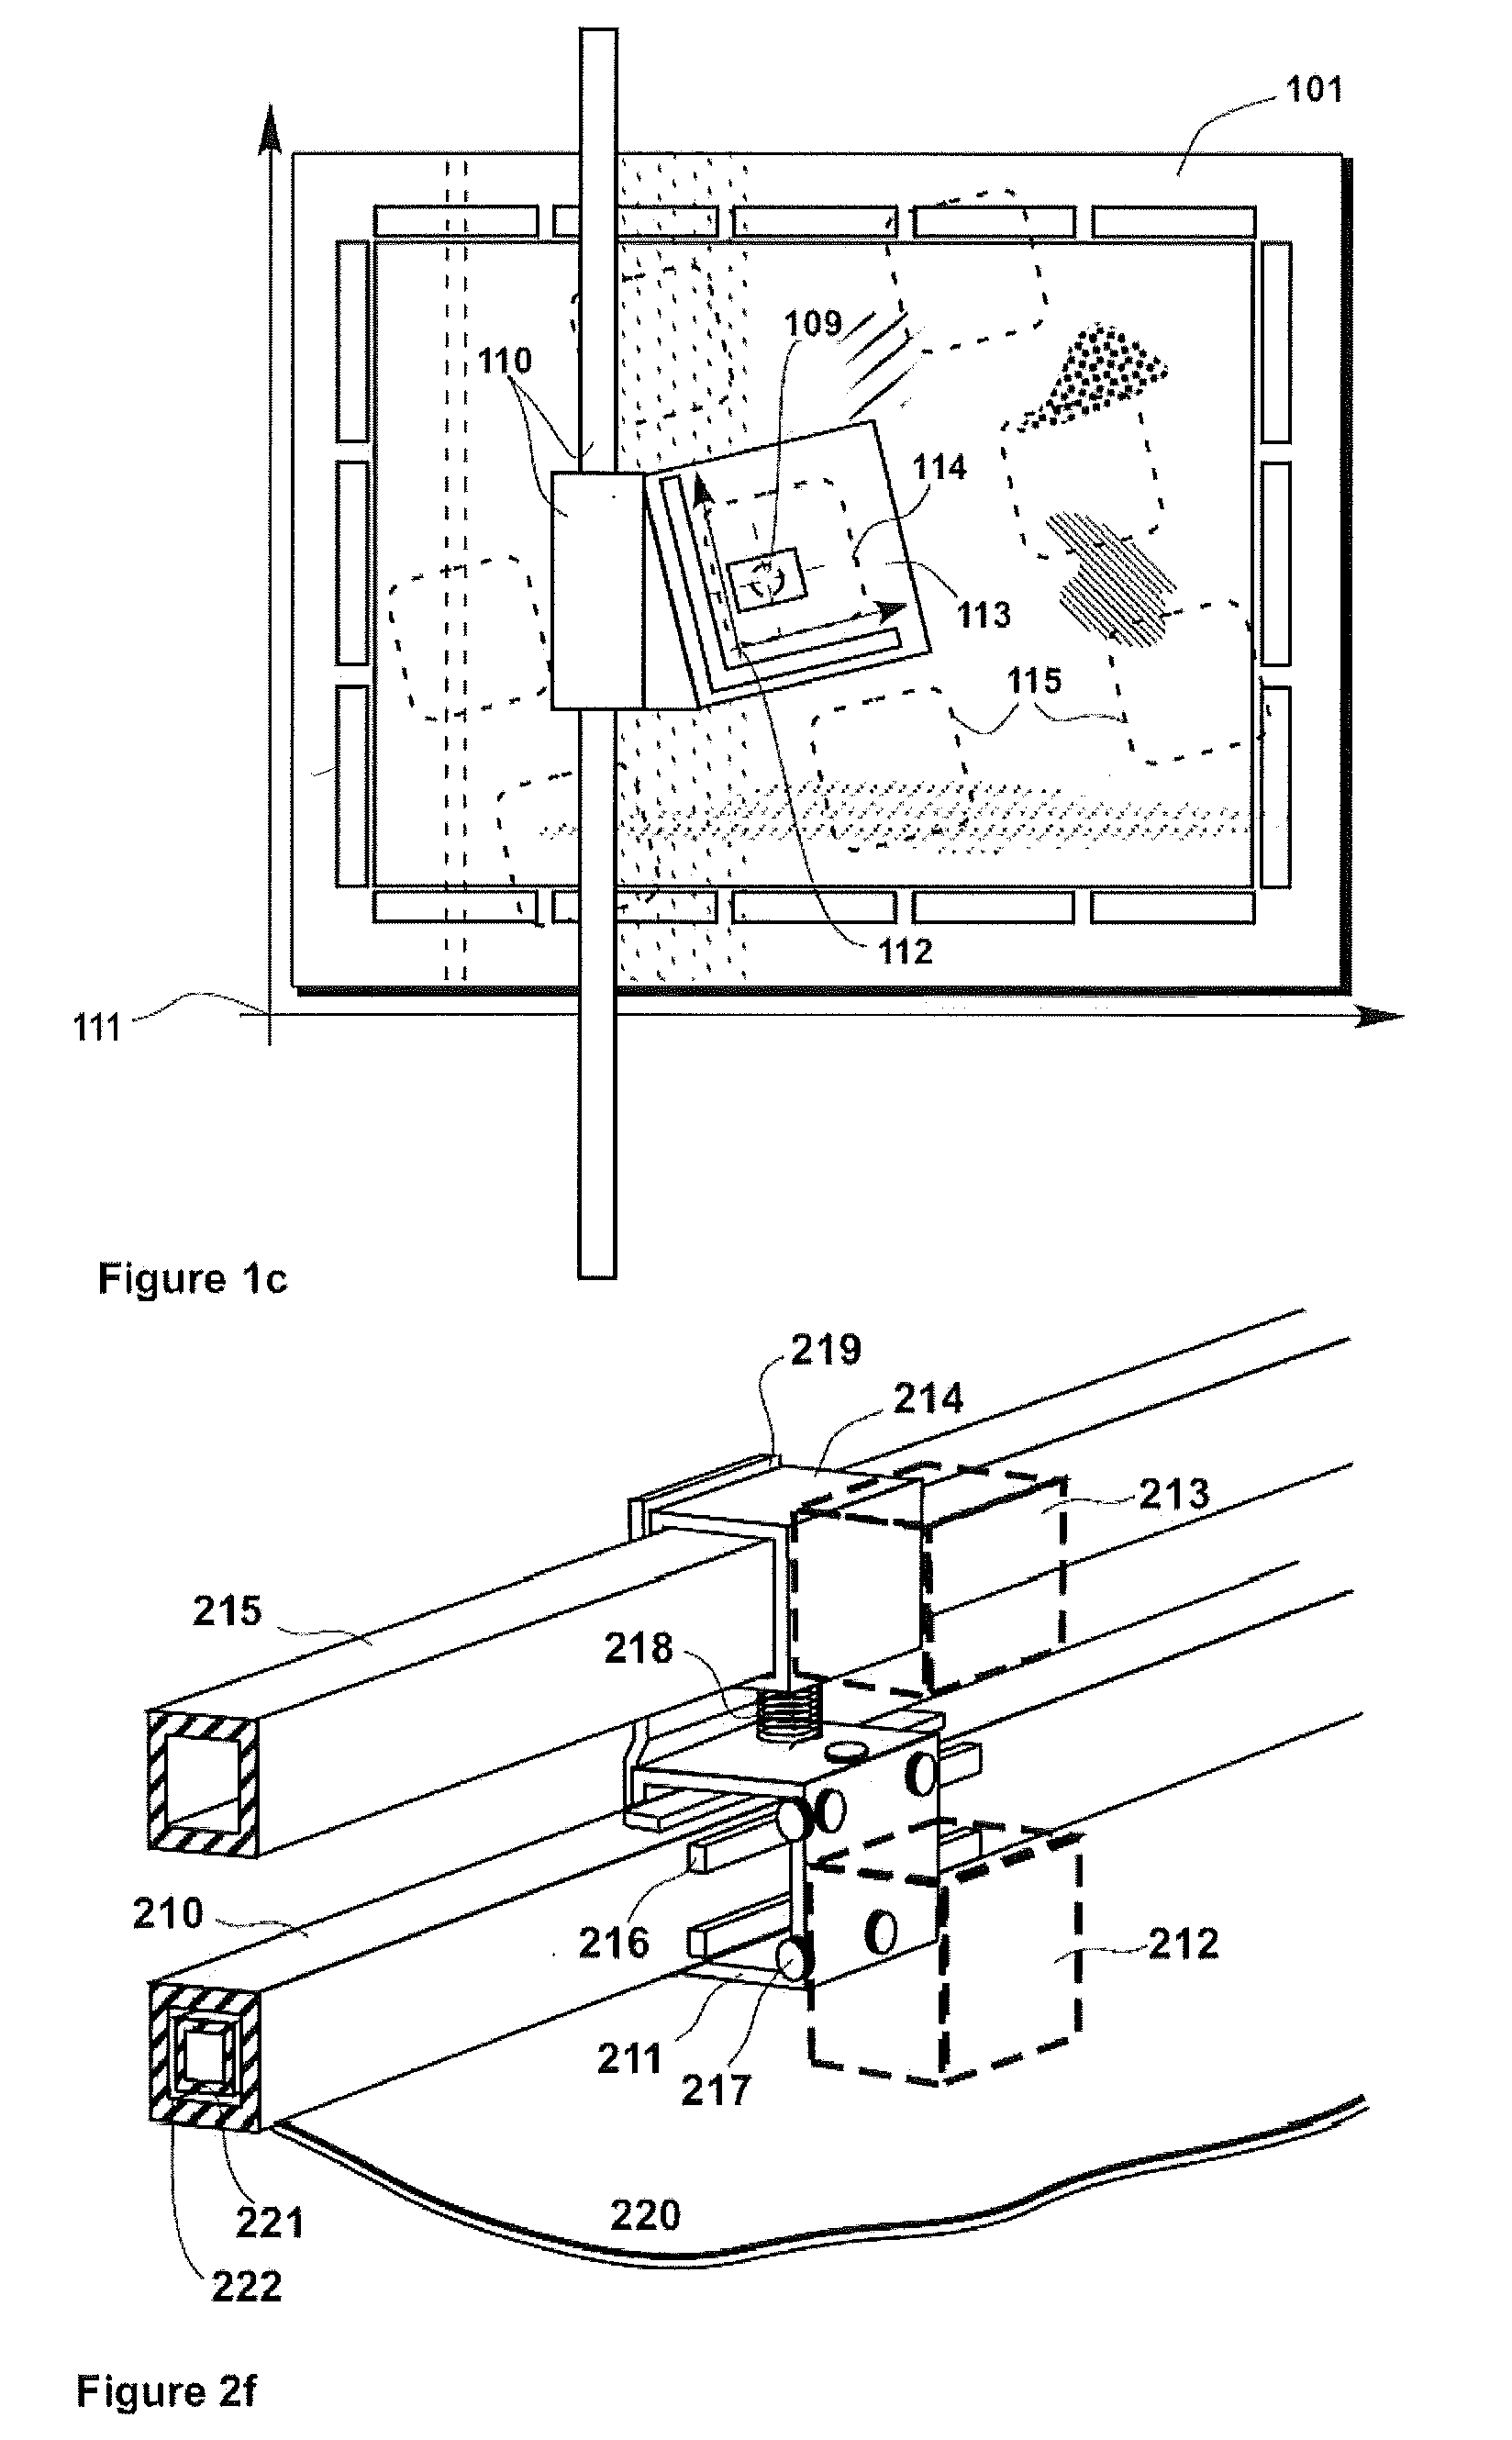 Method and apparatus for mura detection and metrology